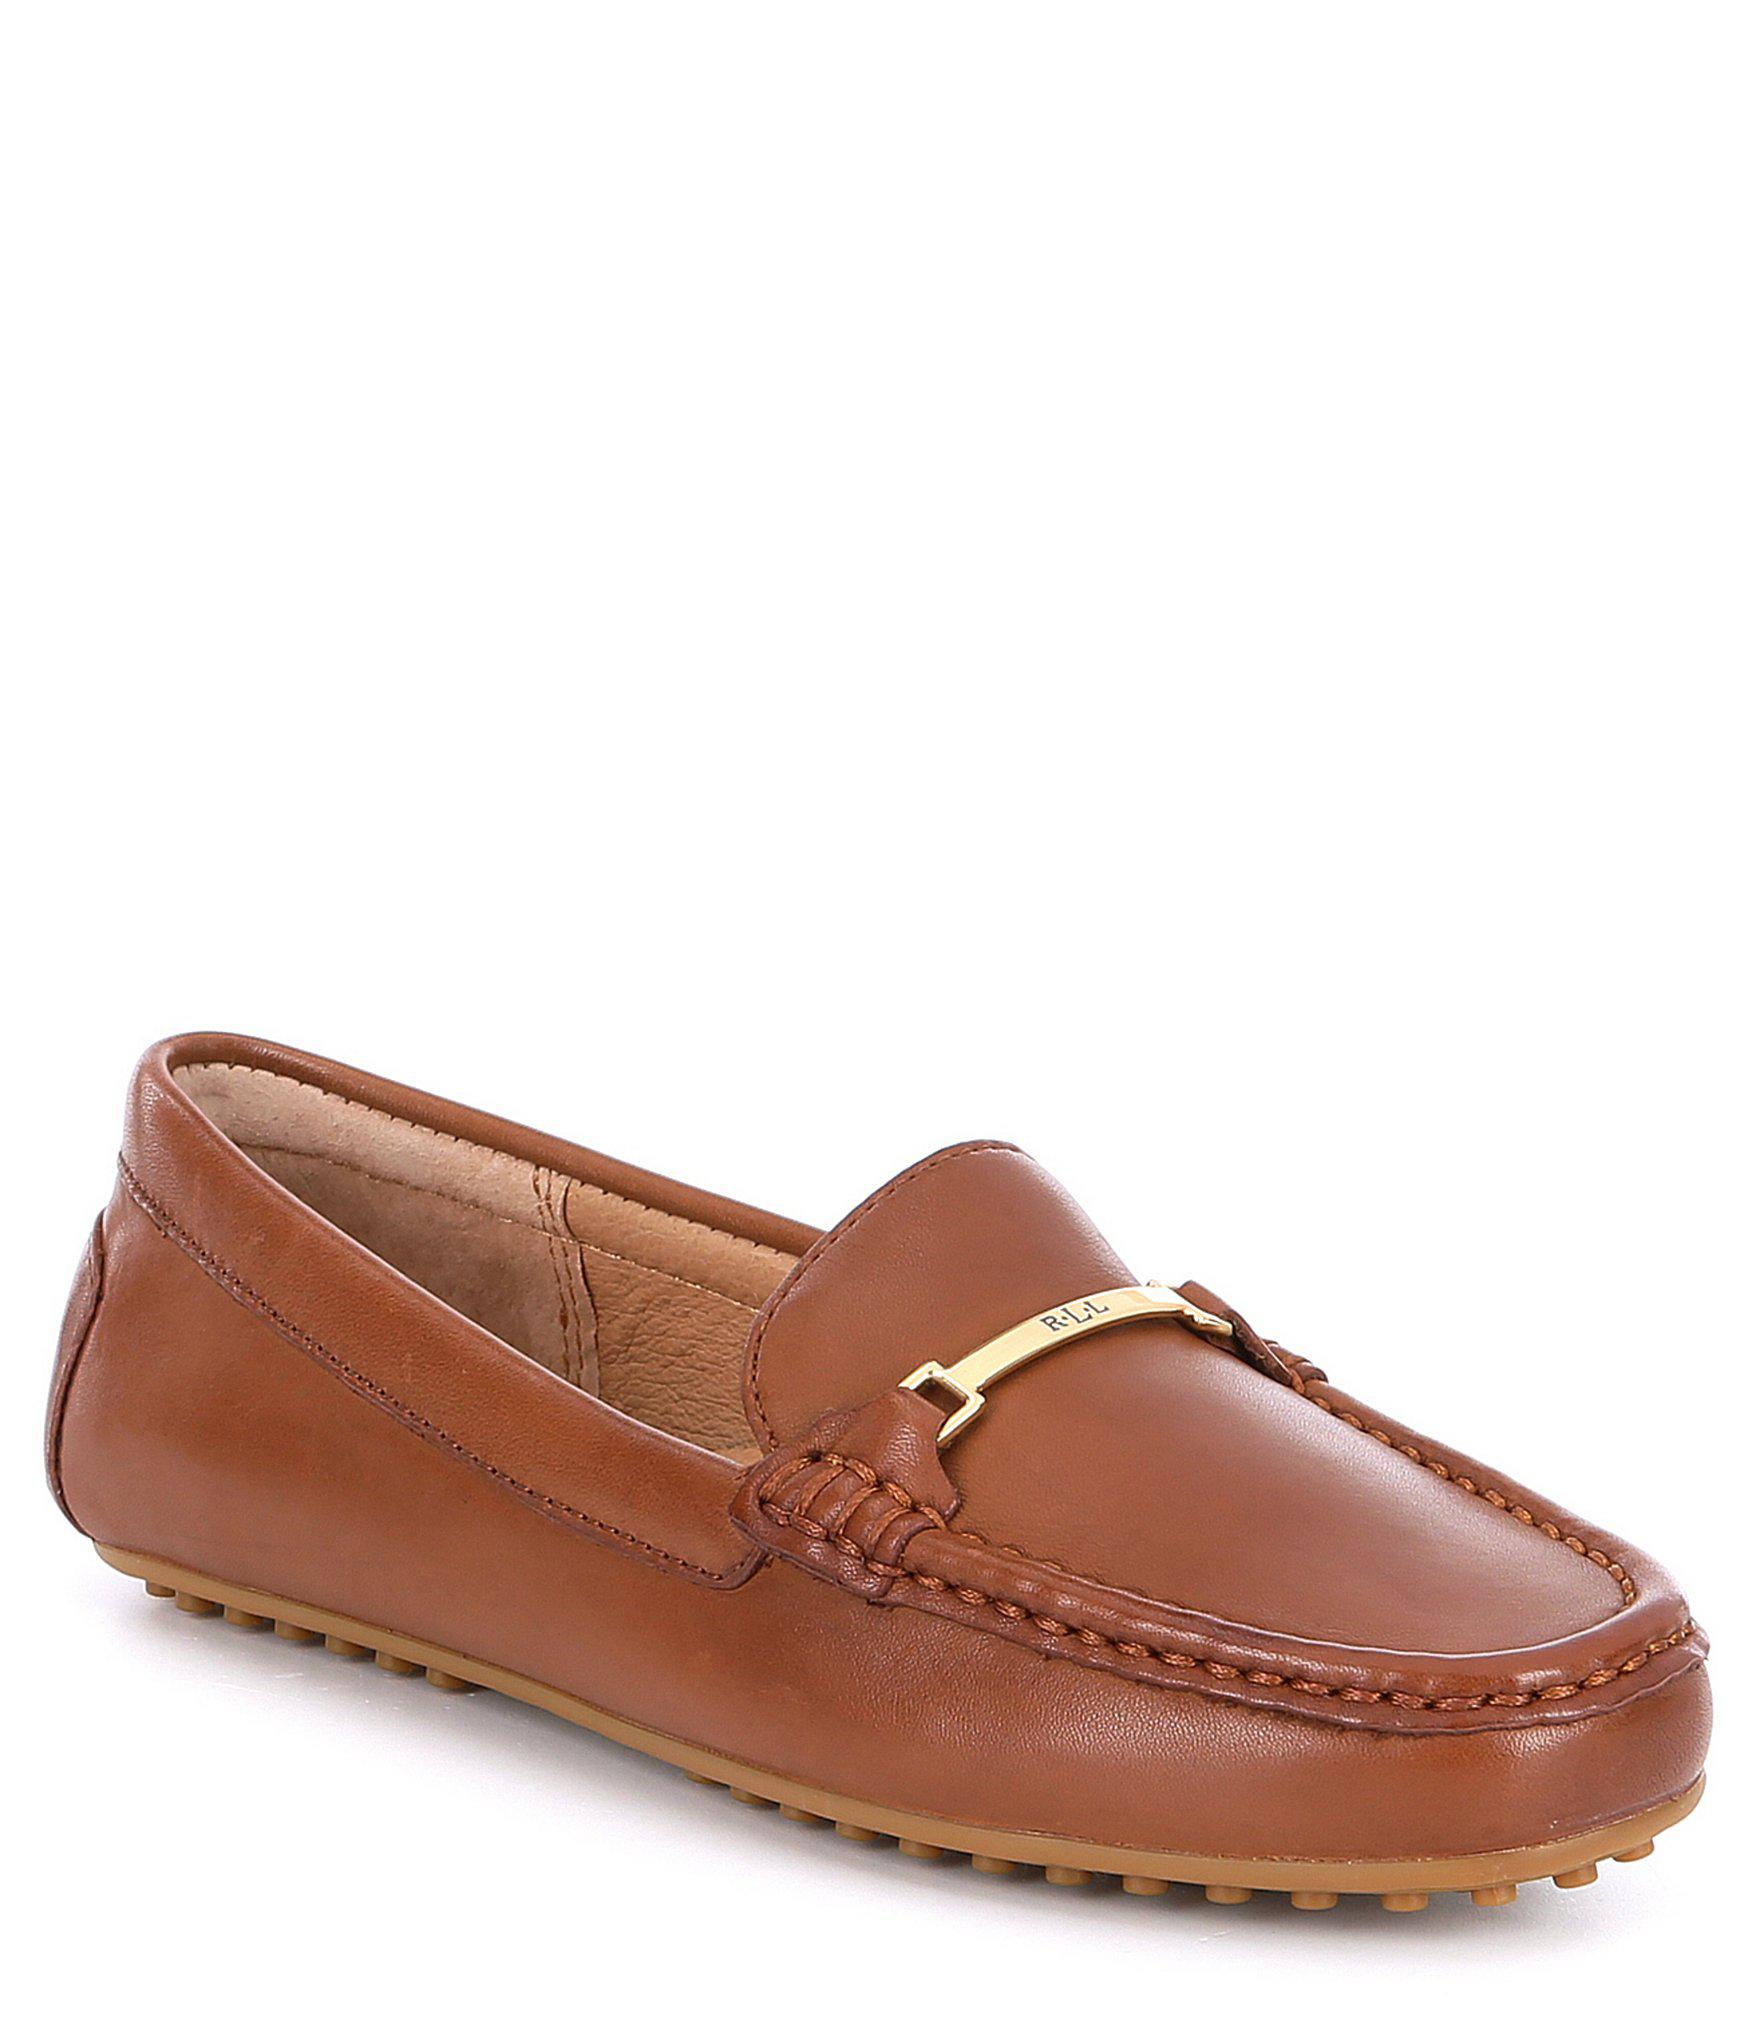 Lauren by Ralph Lauren Briony Leather Driving Loafers in Brown - Lyst